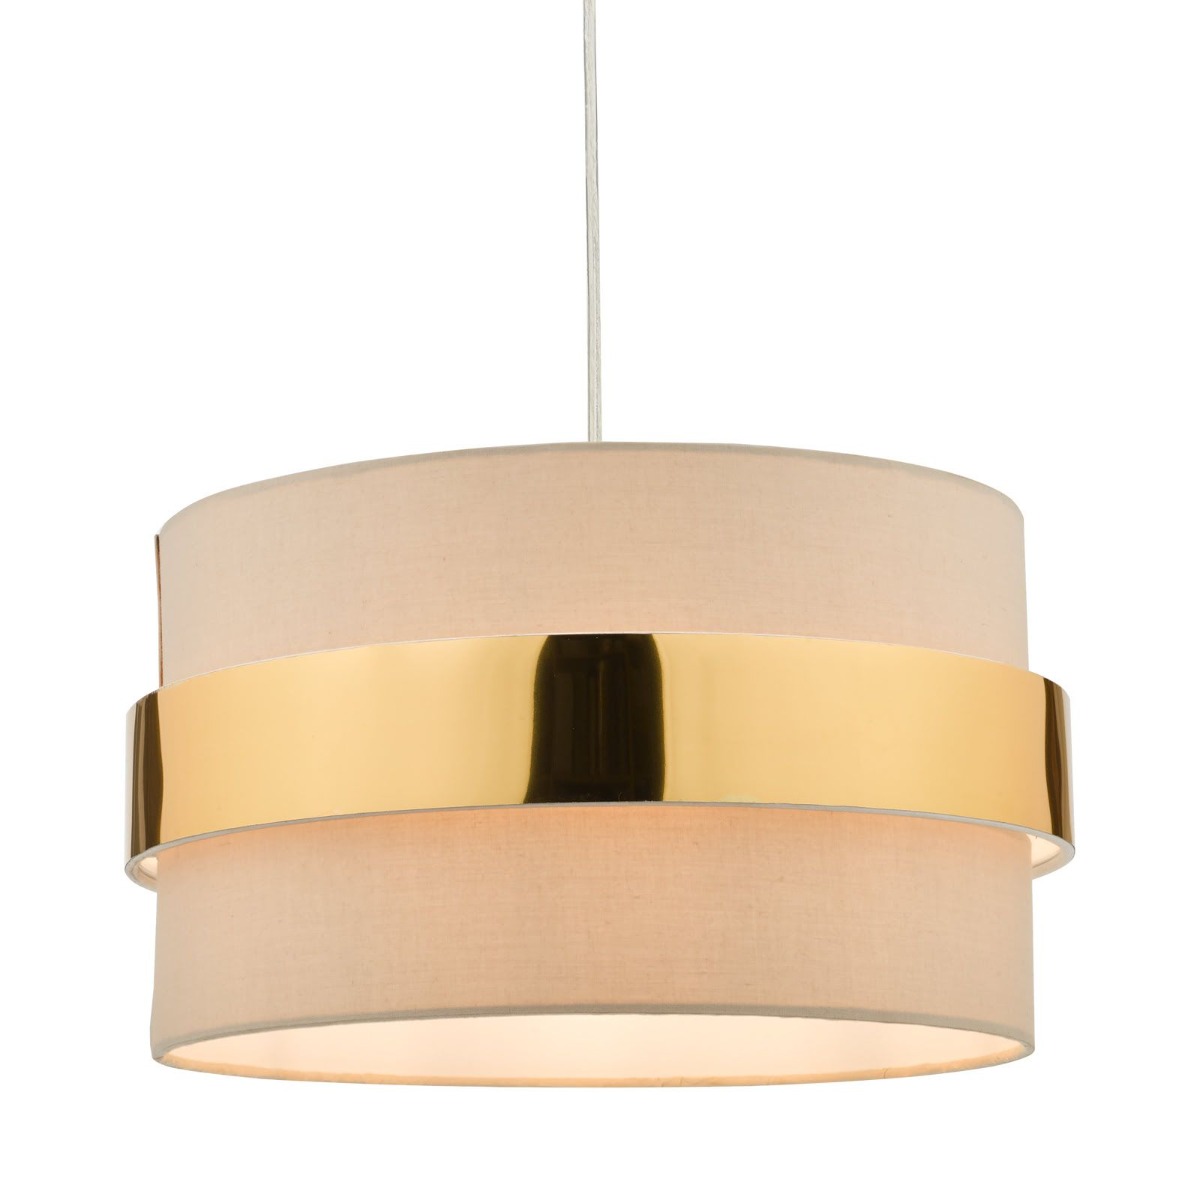 Image of Dar Wisebuys Oki Easy Fit Ceiling Pendant Shade In Taupe And Gold